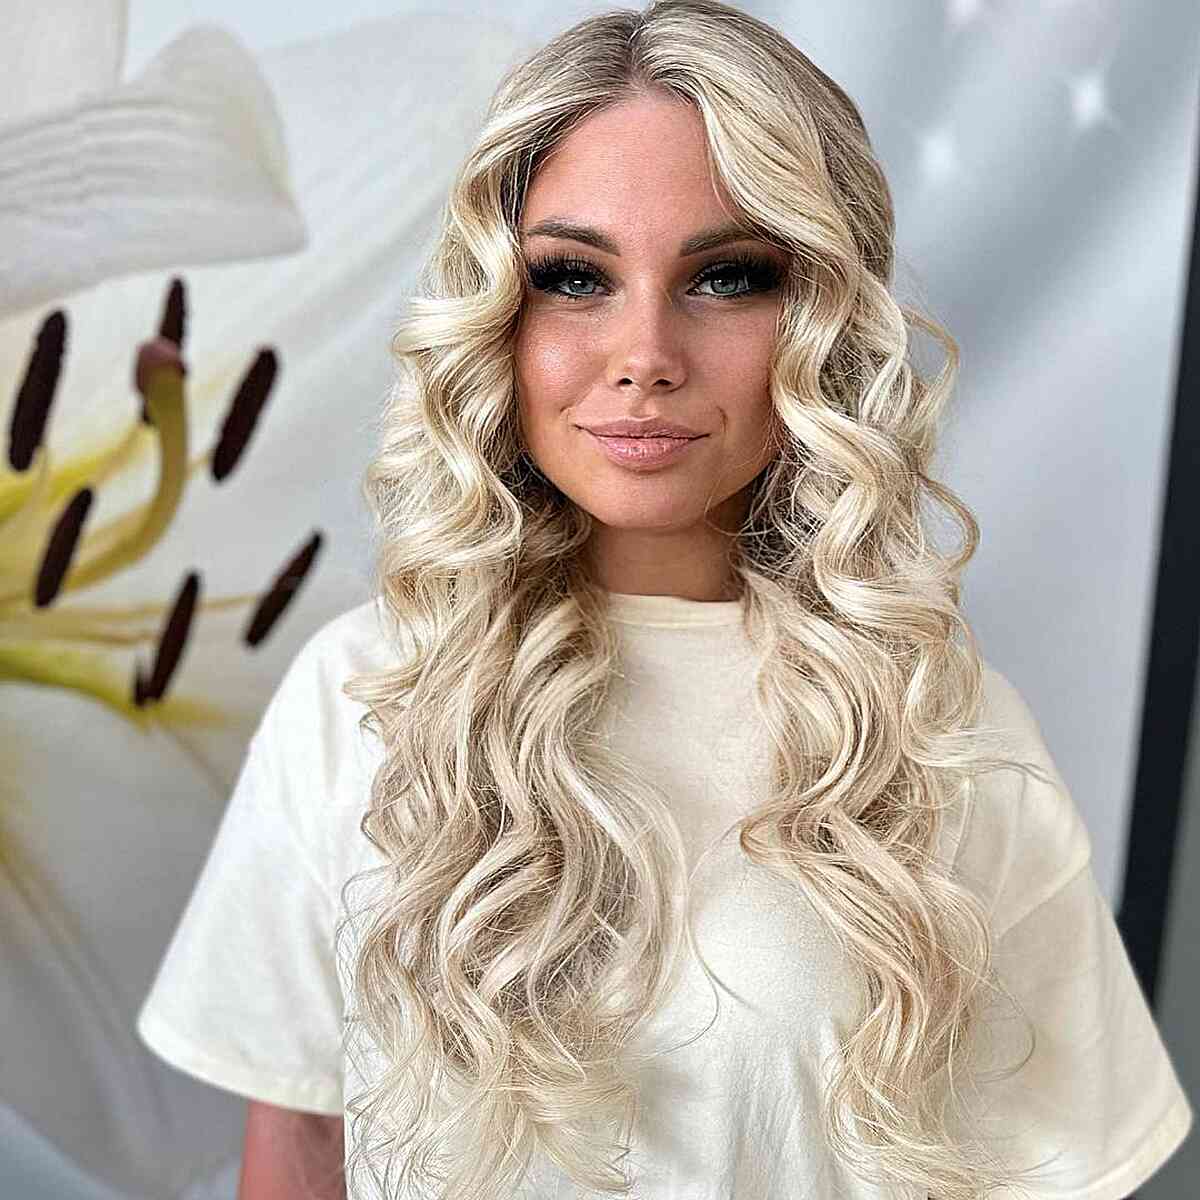 Champagne Blonde Curled Hairstyle with an off center part